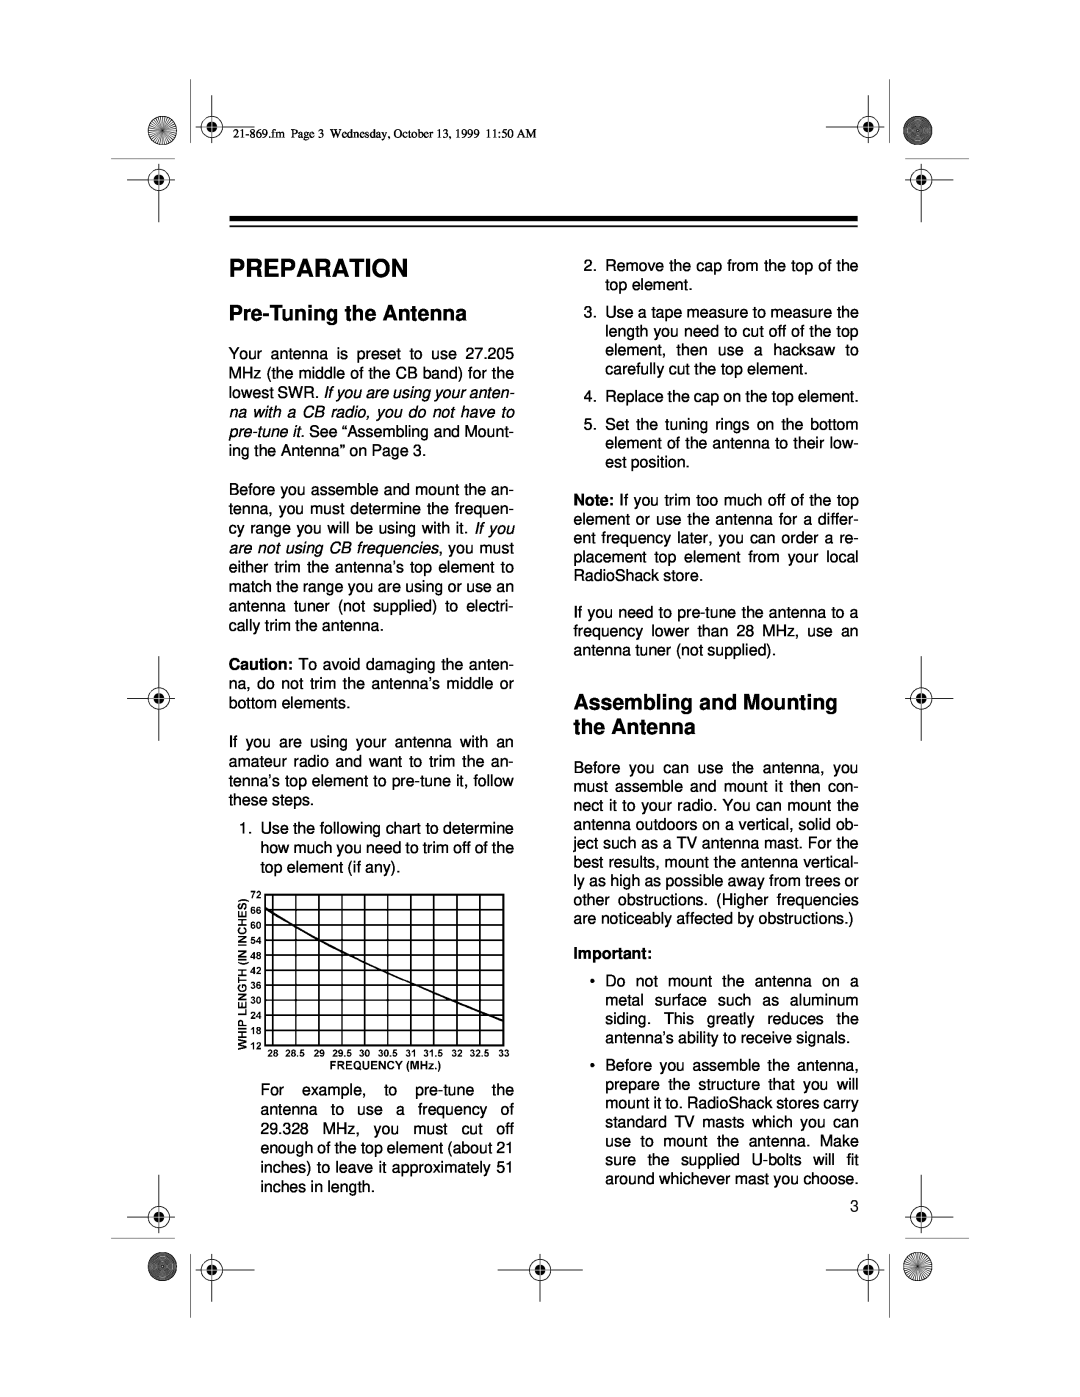 Samsung 21-869 manual Preparation, Pre-Tuningthe Antenna, Assembling and Mounting the Antenna 